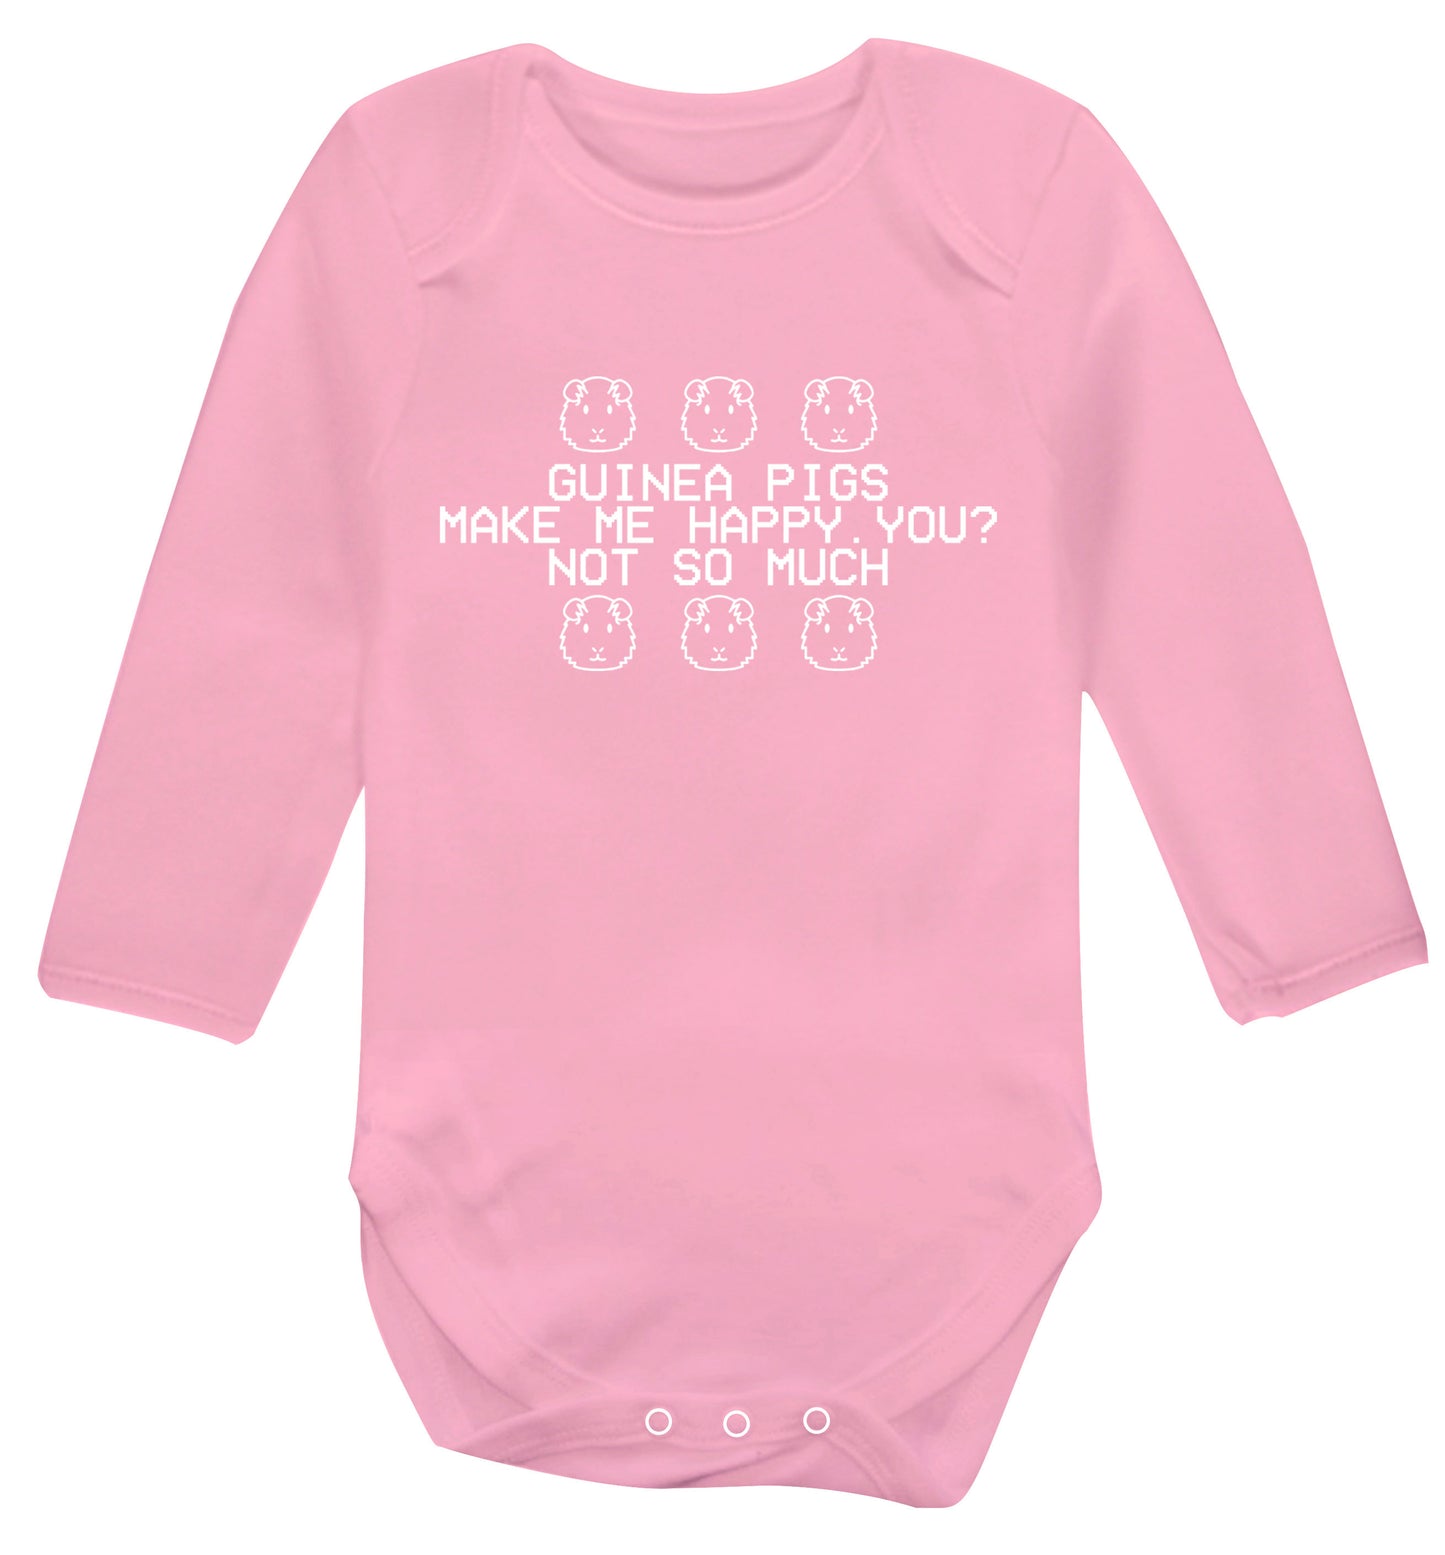 Guinea pigs make me happy, you not so much Baby Vest long sleeved pale pink 6-12 months